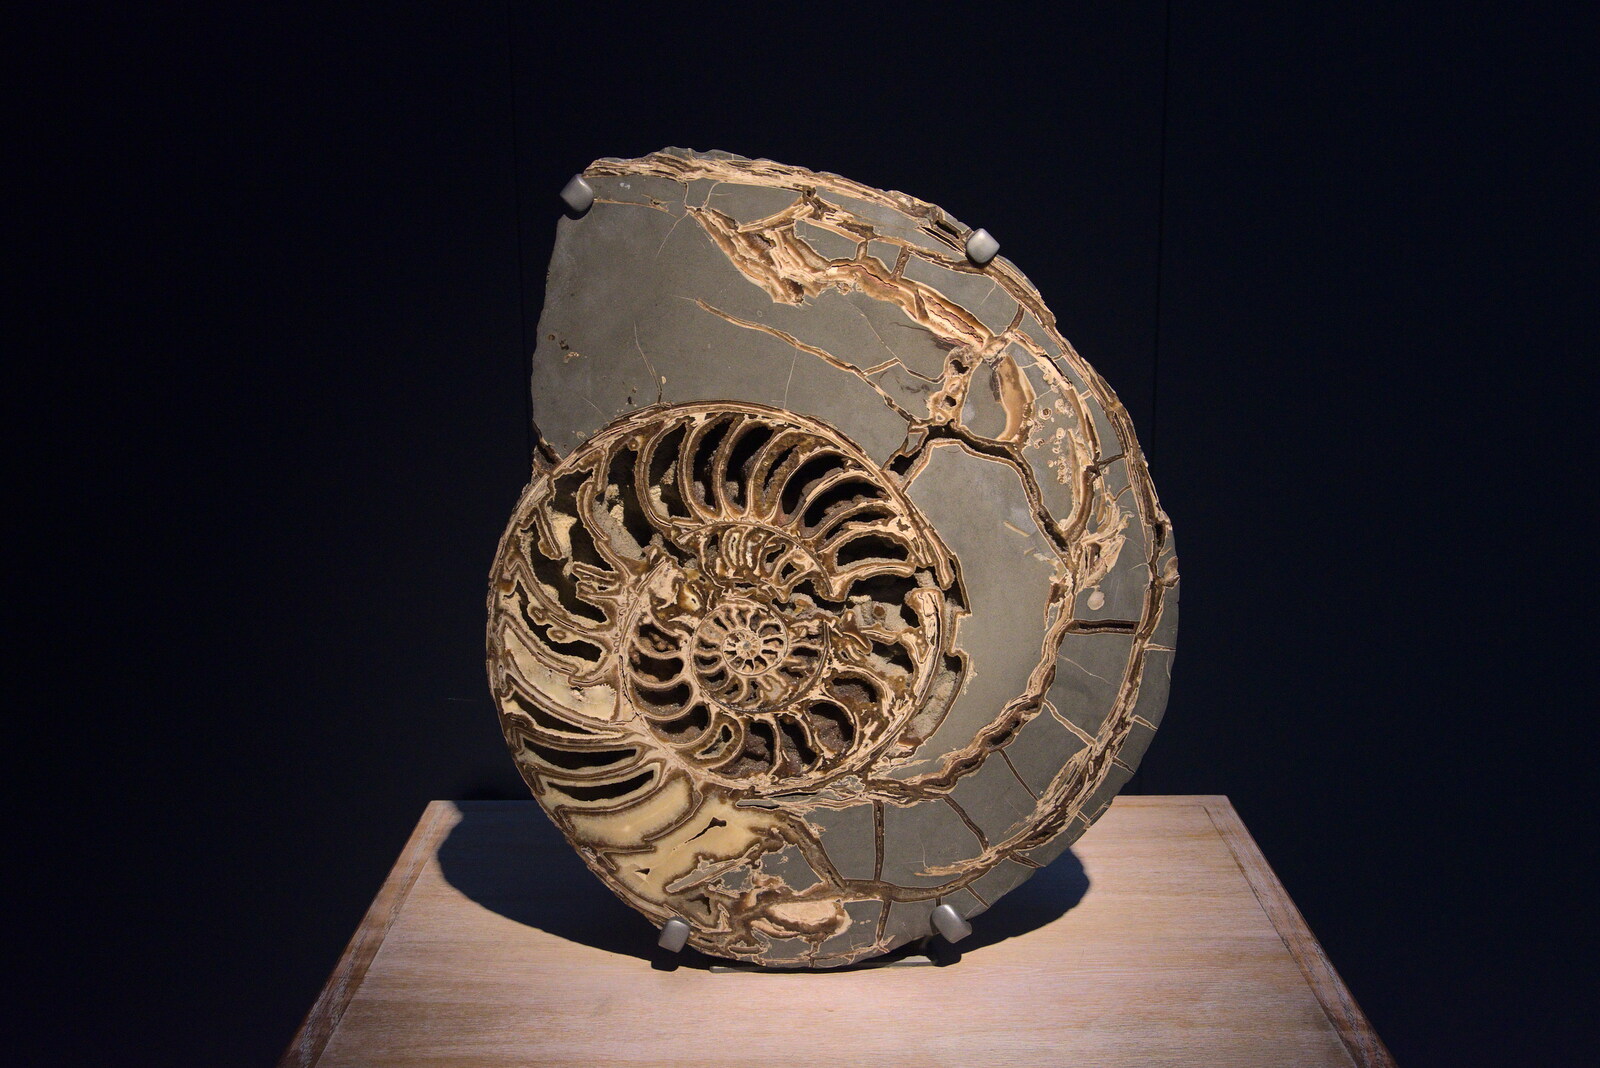 A sliced ammonite from A Trip to the Natural History Museum, Kensington, London - 15th January 2022